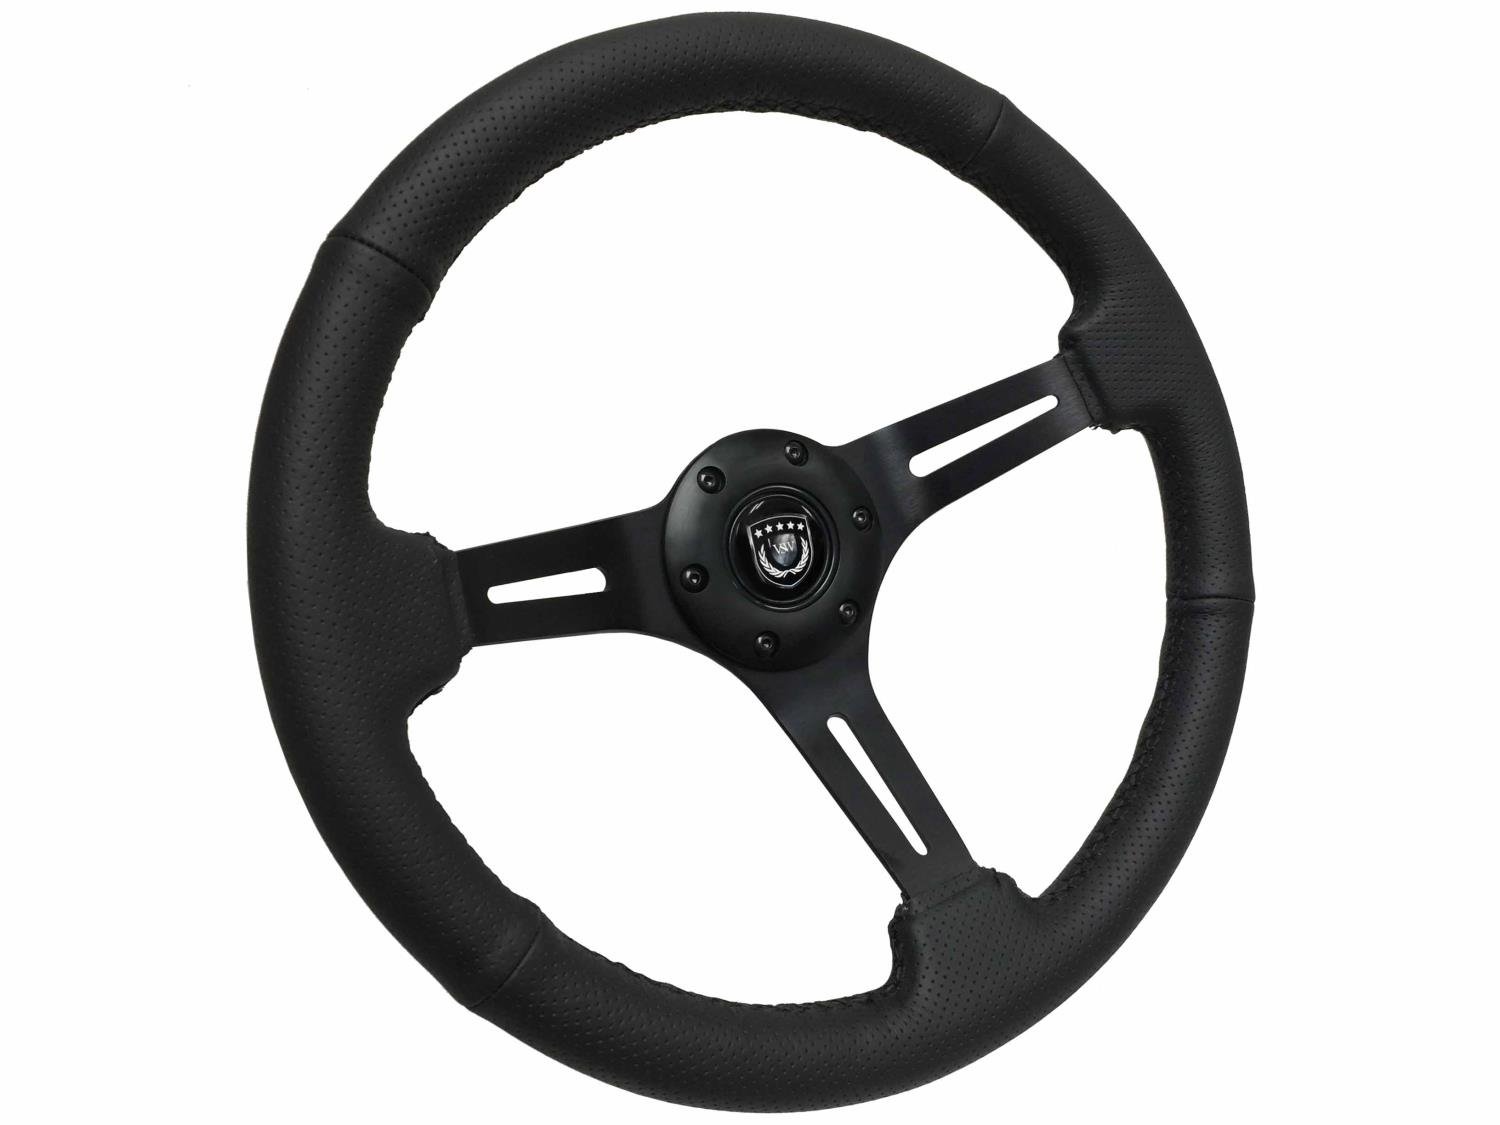 S6 Sport Steering Wheel, 14 in. Diameter, Perforated Black Leather Grip with Black Stitching